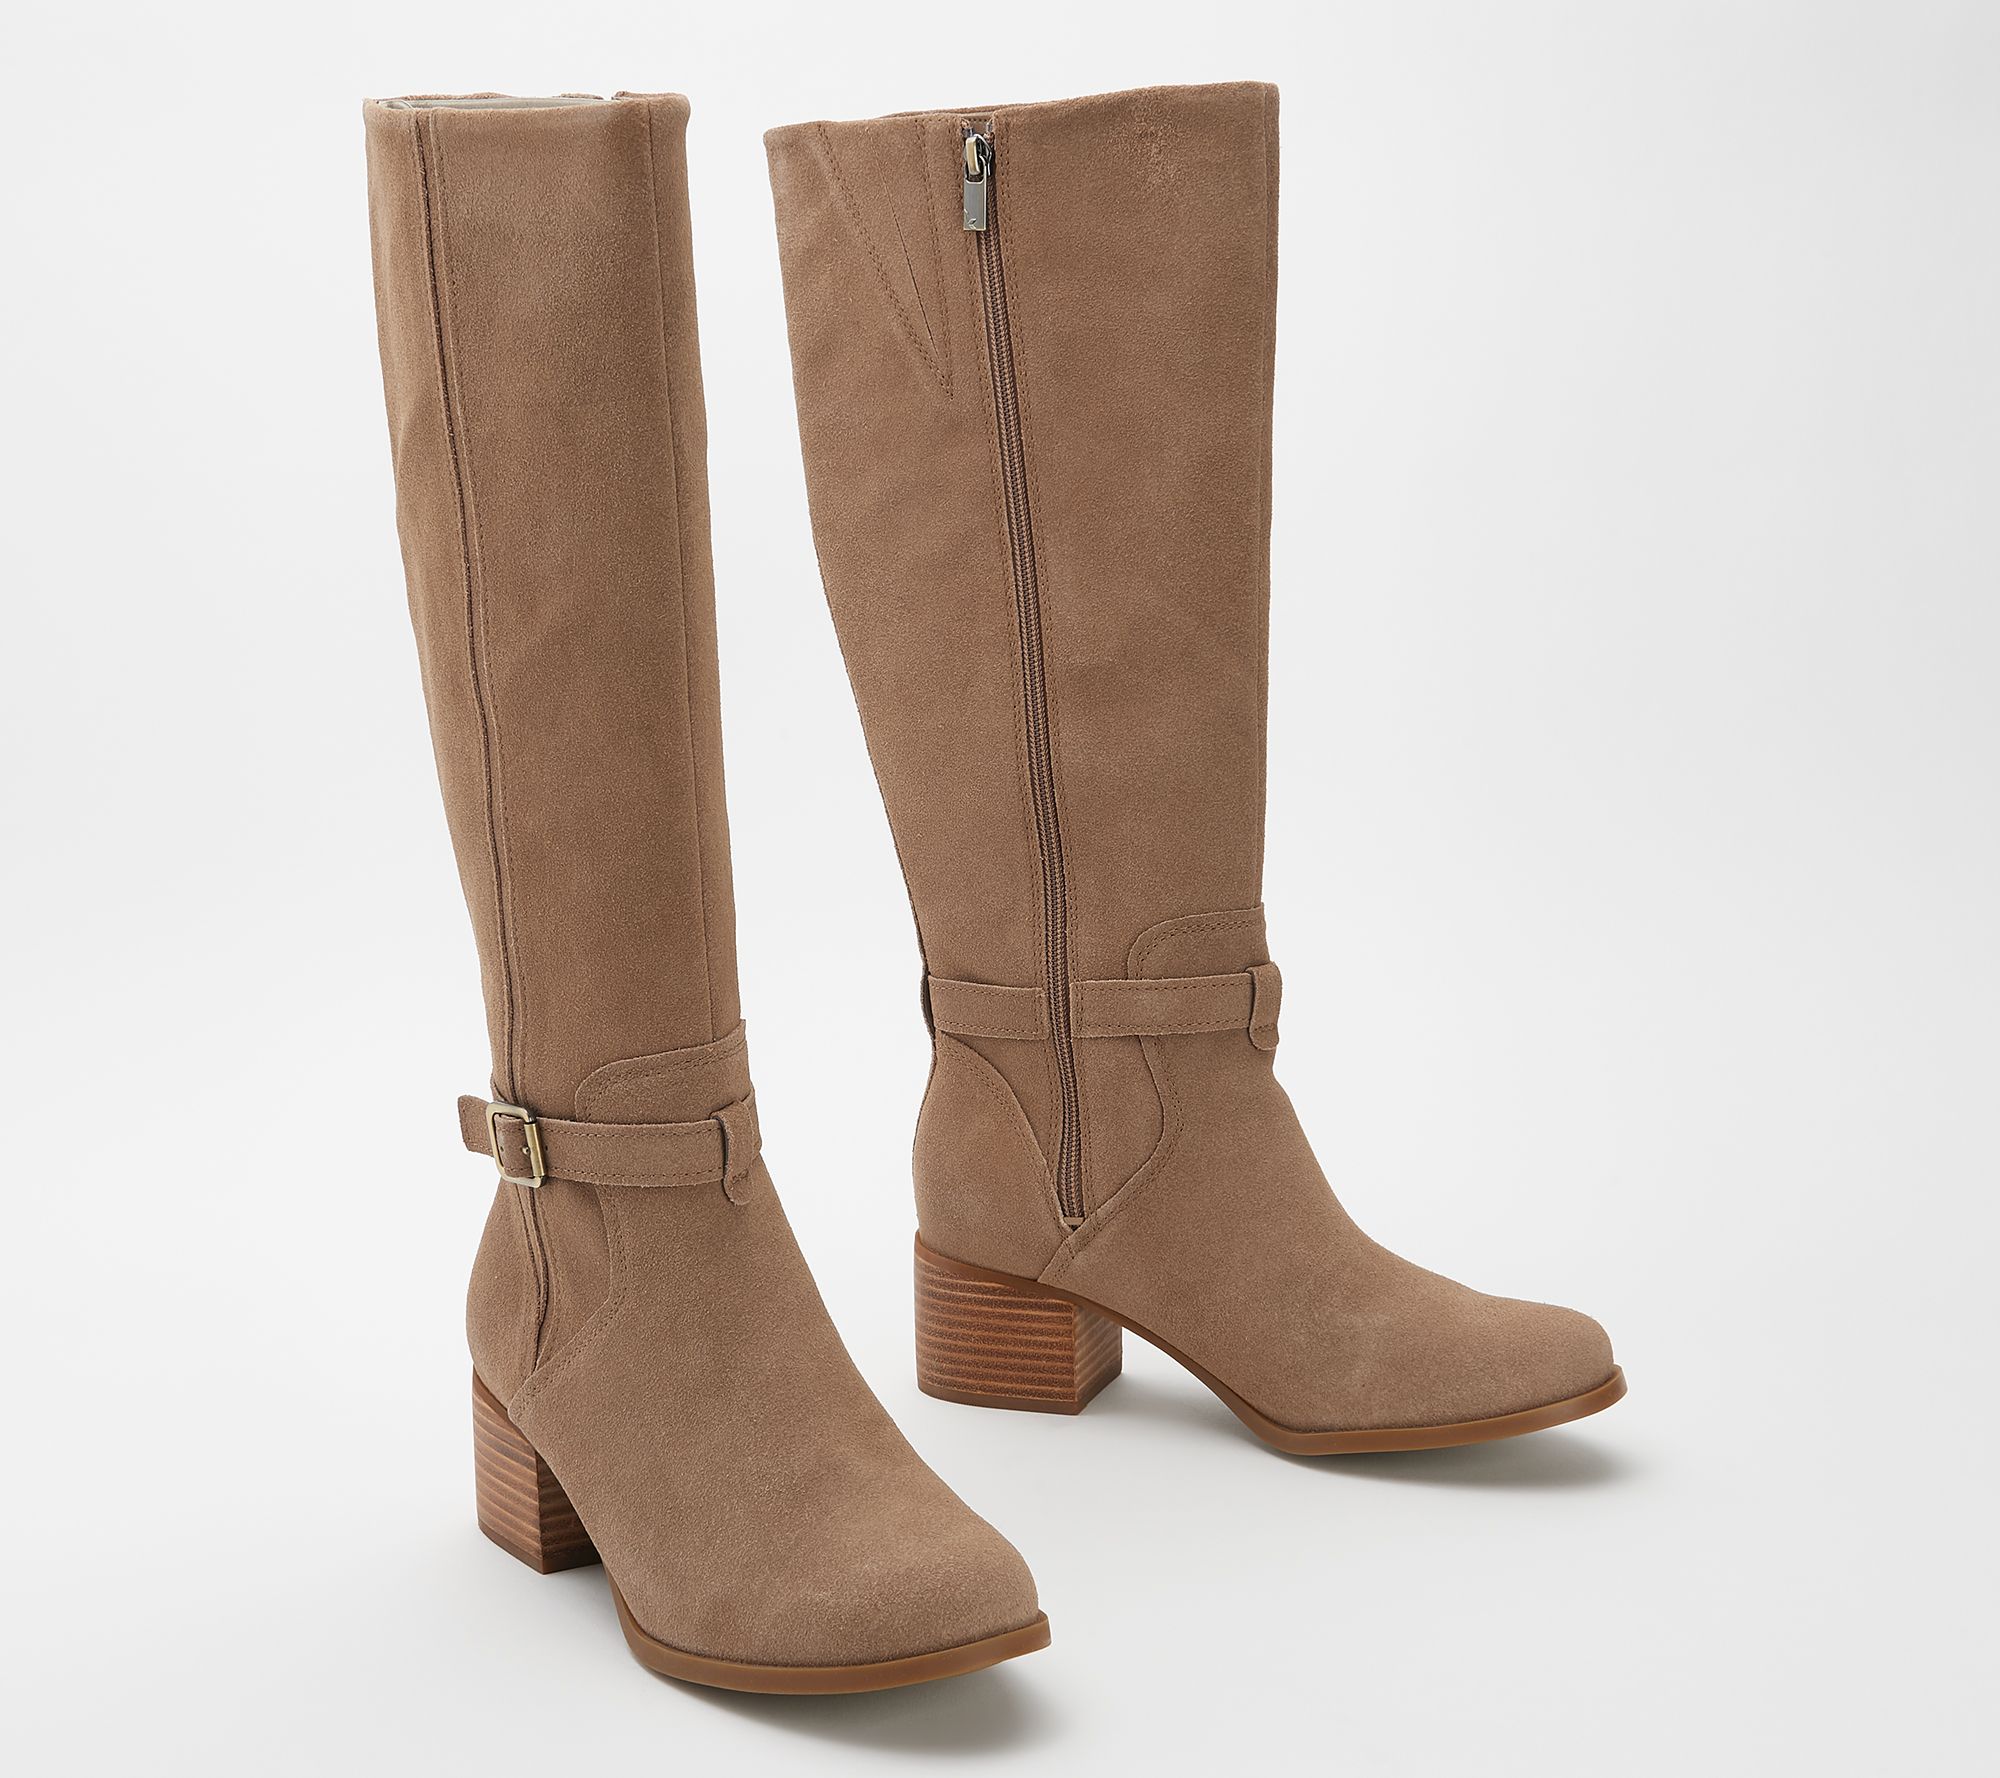 ugg tall brown boots